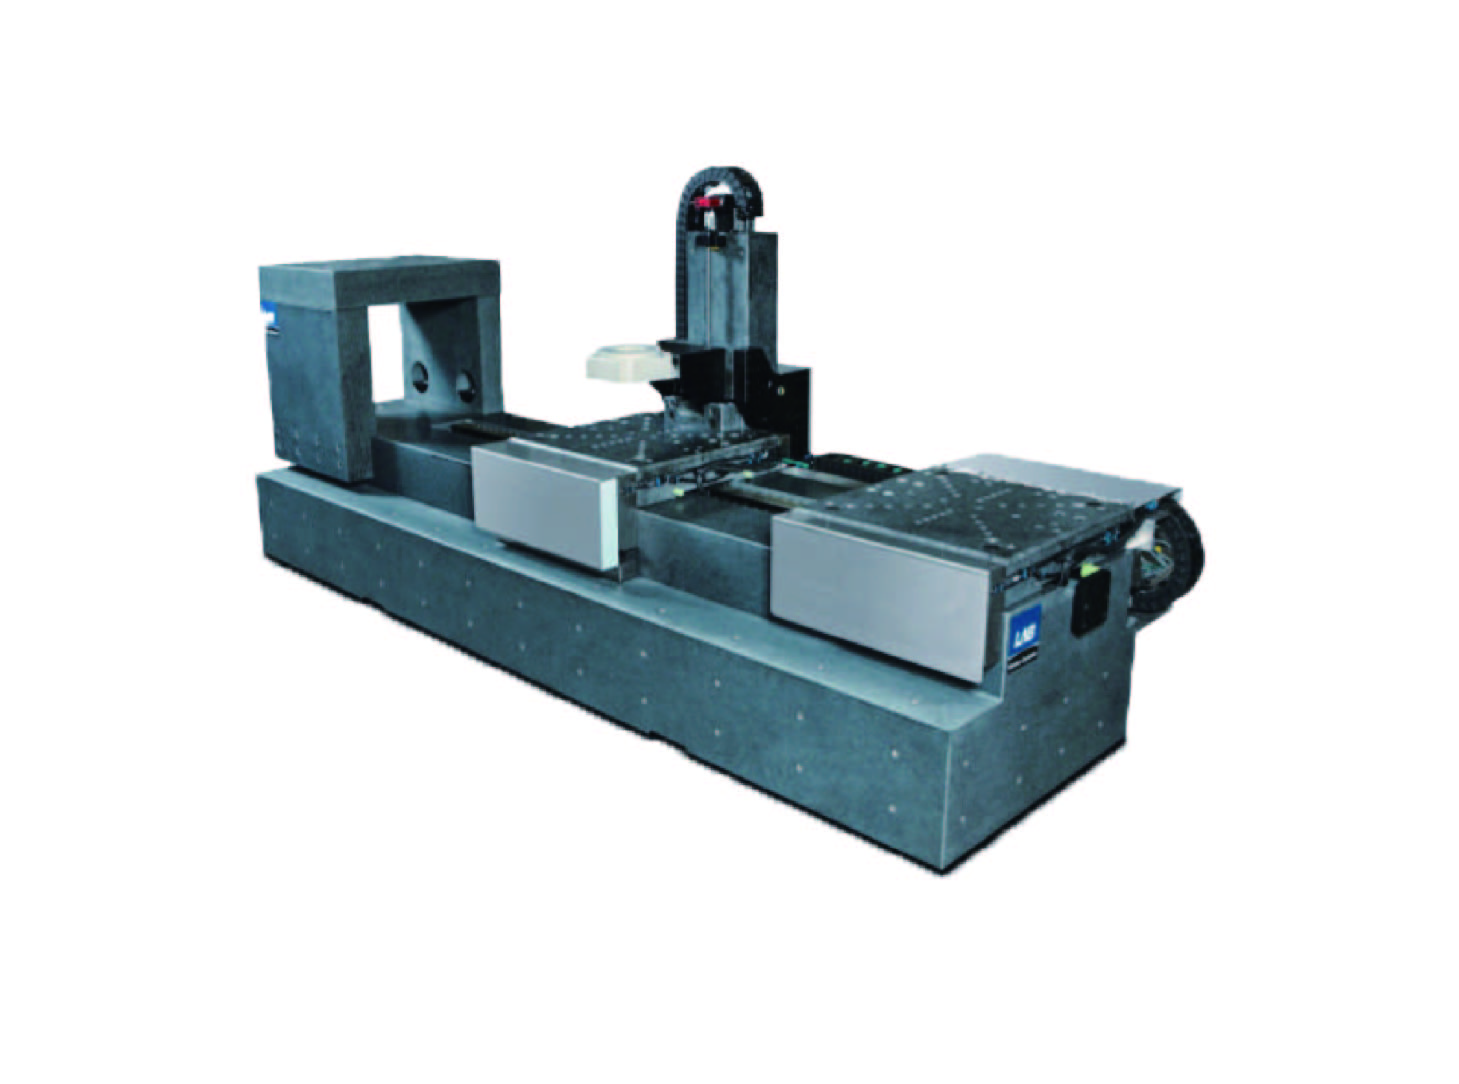 4 AXIS MOTION SYSTEM